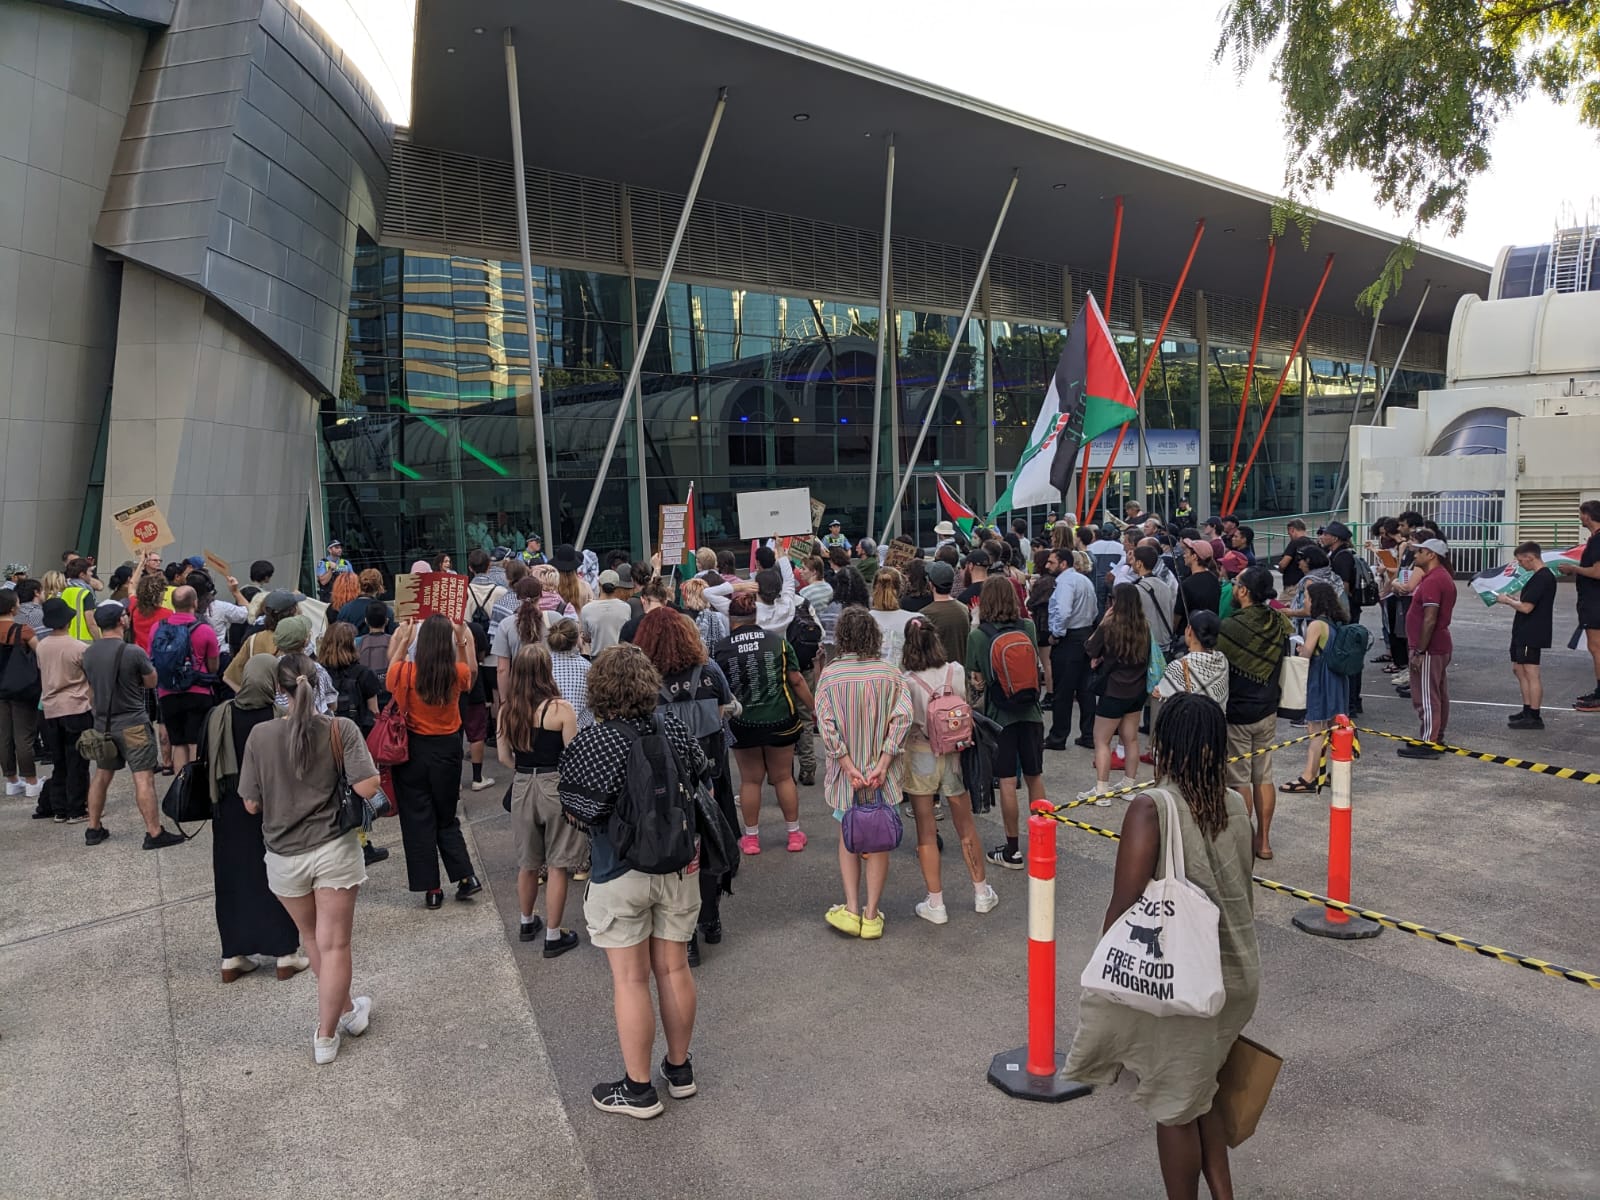 The crowd outside the Convention Centre where Almog was speaking.